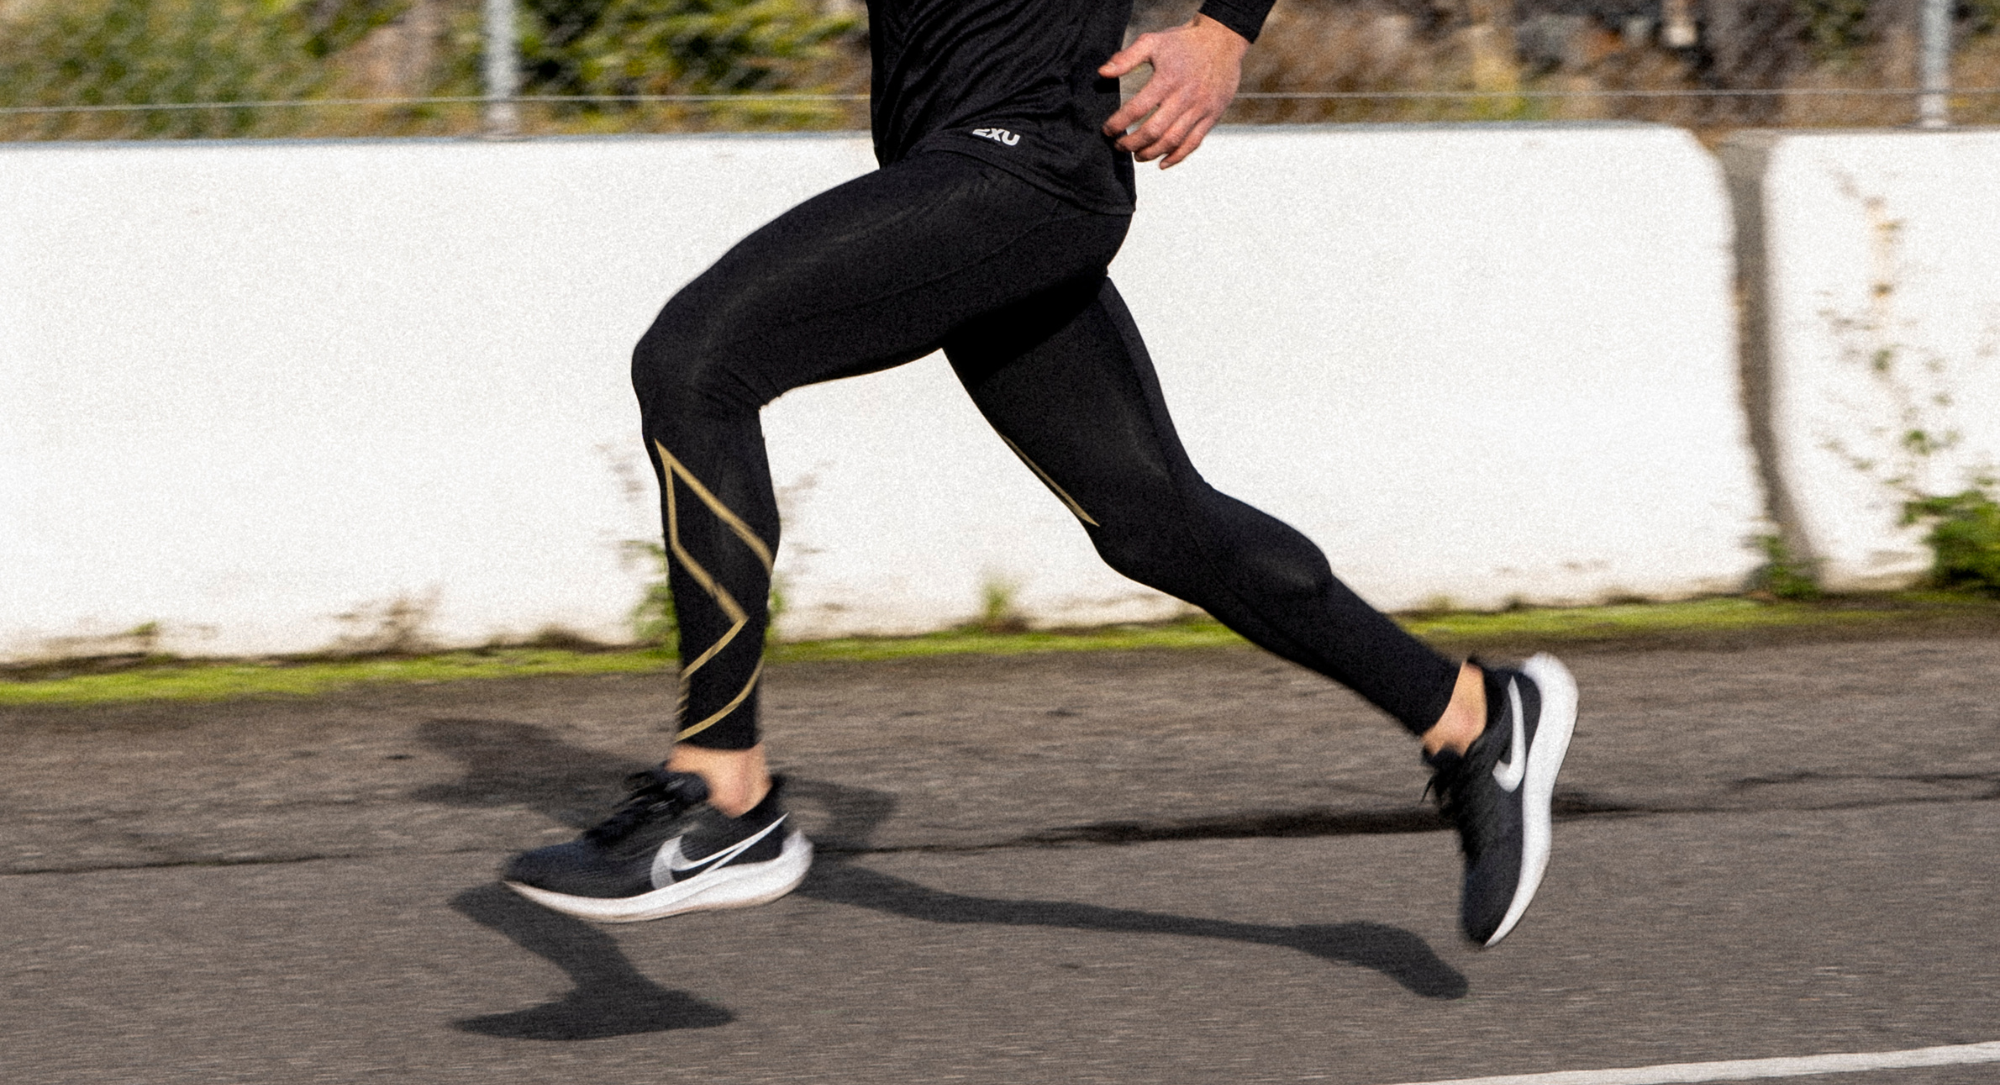 The Compression tights every runner should own – 2XU